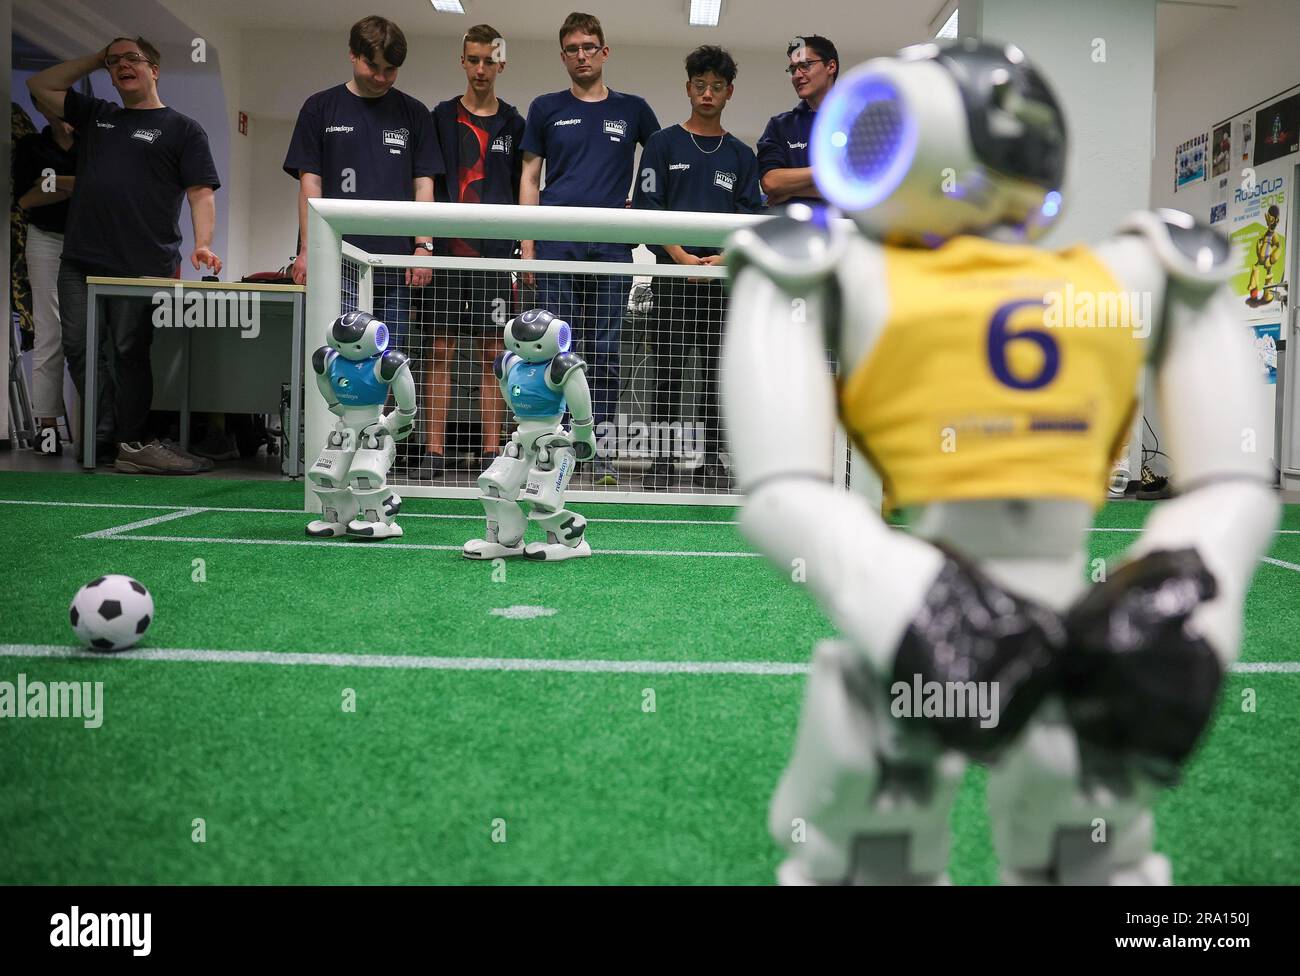 Leipzig, Germany. 28th June, 2023. Nao robots play soccer during a training game in a laboratory at the Leipzig University of Applied Sciences (HTWK). Having already become world champions in robot soccer in 2018, the Leipzig team is aiming to secure the title again this year. Starting July 5, robots playing soccer will face off in a World Cup in Bordeaux, France. Credit: Jan Woitas/dpa/Alamy Live News Stock Photo